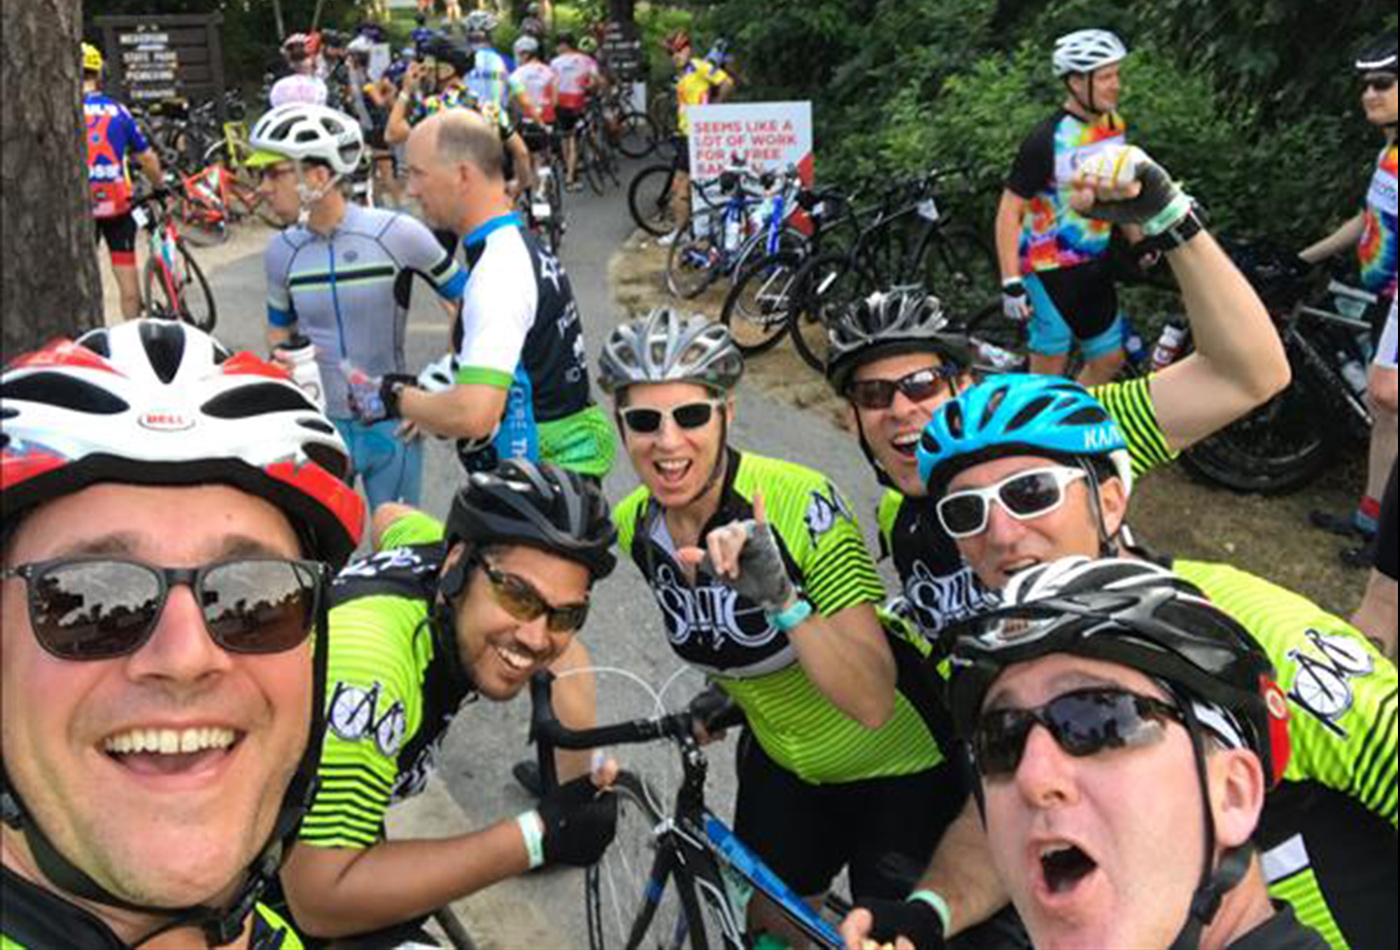 A team of bicyclists pose for a selfie while on the road.